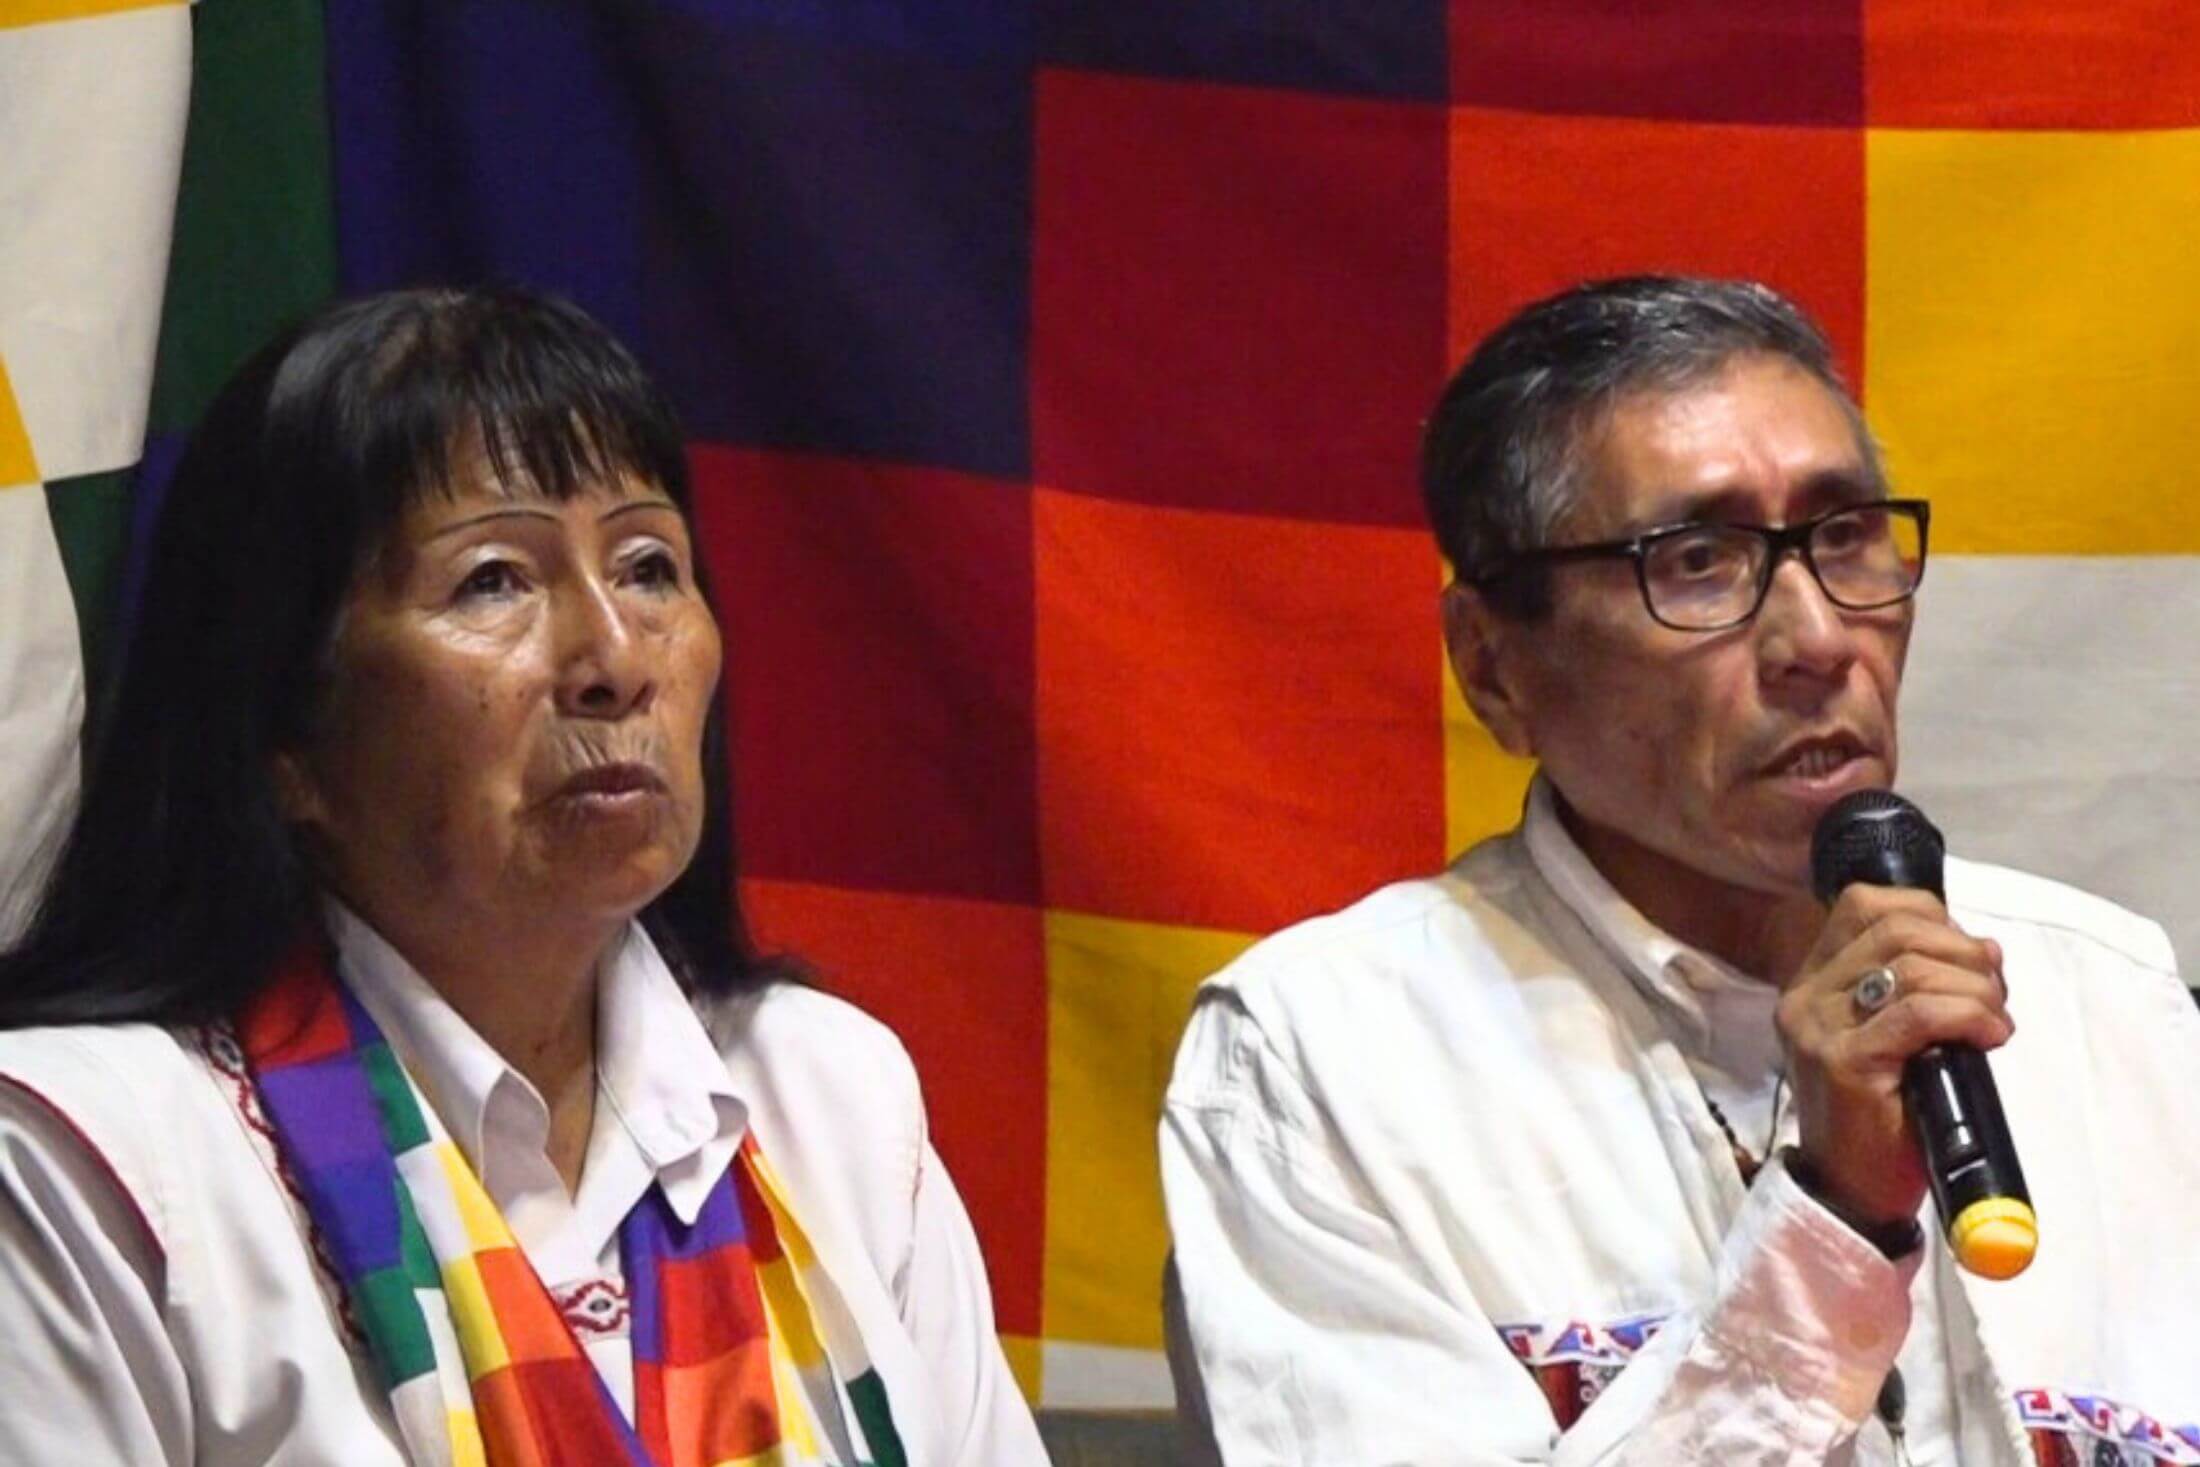 Indigenous woman and man from Argentina, wearing white tops. The man is speaking into a microphone. Behind them is the Wiphala Indigenous flag made up of squares coloured dark brown, dark red, orange, yellow and white. The woman wears a scarf with the same emblem.